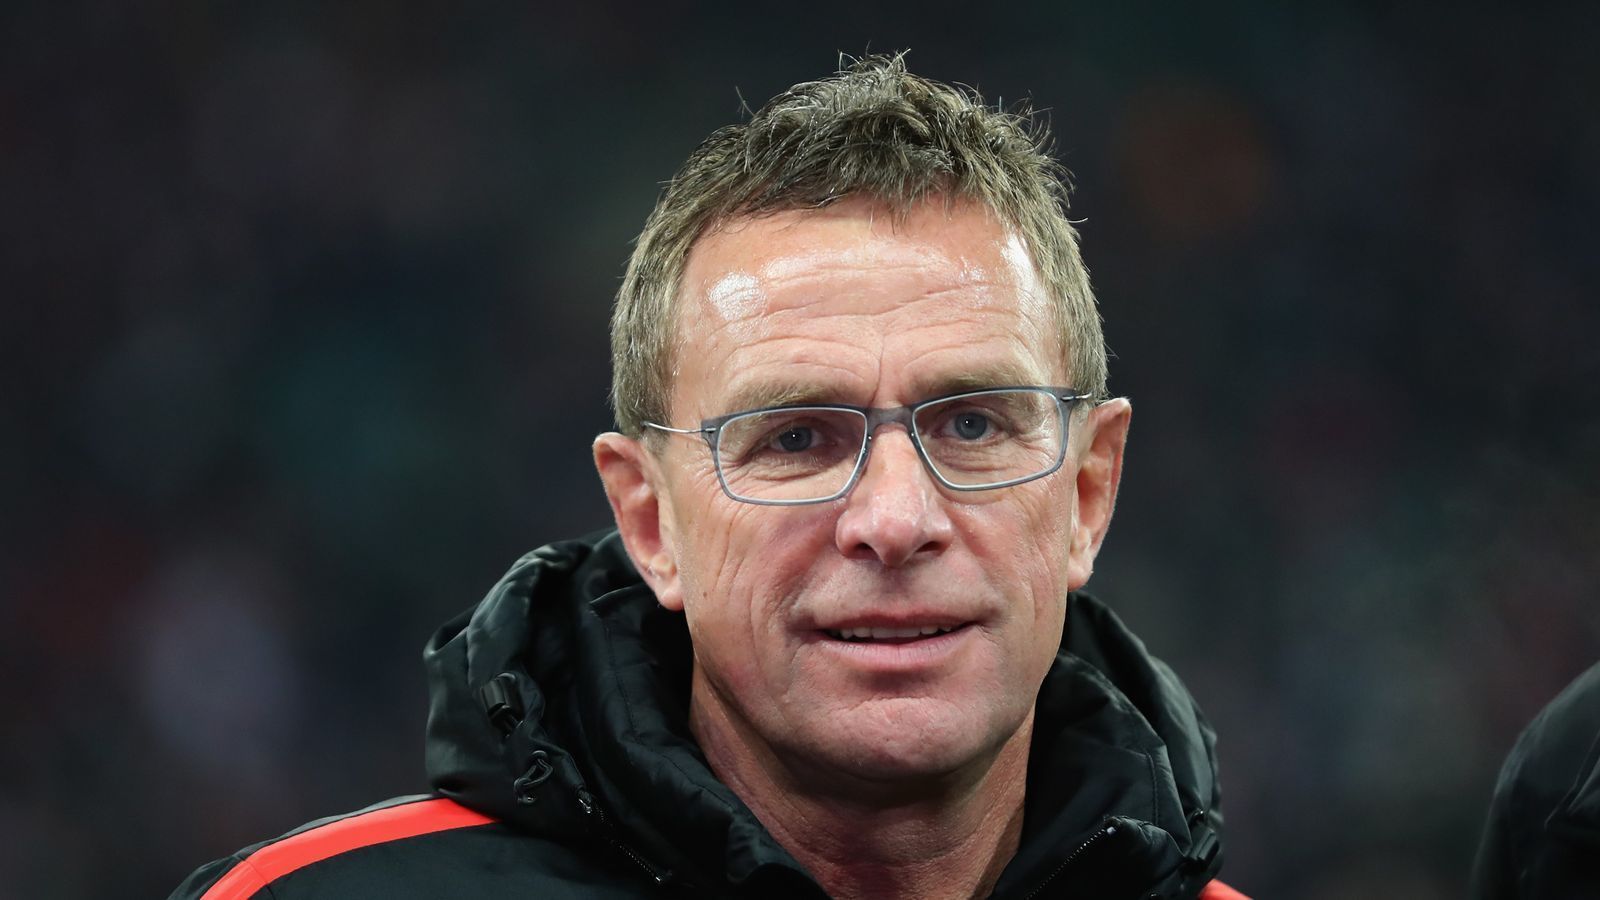 Ralf Rangnick will take charge of Manchester United. Image Credits: Sky Sports